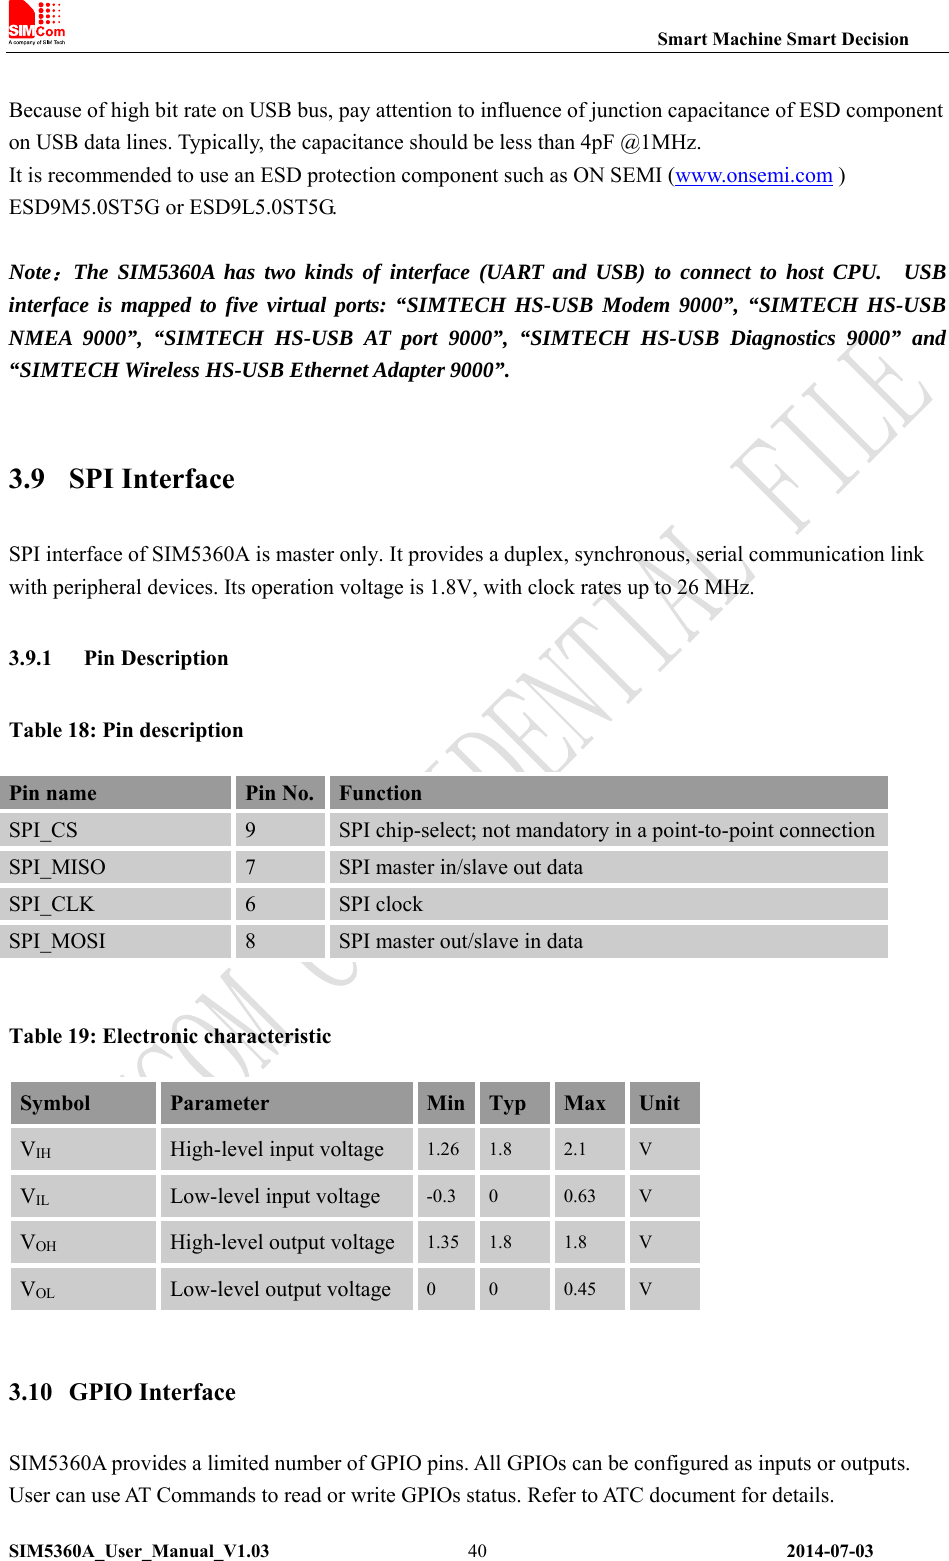                                                                Smart Machine Smart Decision SIM5360A_User_Manual_V1.03                 2014-07-03 40 Because of high bit rate on USB bus, pay attention to influence of junction capacitance of ESD component on USB data lines. Typically, the capacitance should be less than 4pF @1MHz. It is recommended to use an ESD protection component such as ON SEMI (www.onsemi.com )   ESD9M5.0ST5G or ESD9L5.0ST5G.  Note：The SIM5360A has two kinds of interface (UART and USB) to connect to host CPU.  USB interface is mapped to five virtual ports: “SIMTECH HS-USB Modem 9000”, “SIMTECH HS-USB NMEA 9000”, “SIMTECH HS-USB AT port 9000”, “SIMTECH HS-USB Diagnostics 9000” and “SIMTECH Wireless HS-USB Ethernet Adapter 9000”.  3.9 SPI Interface SPI interface of SIM5360A is master only. It provides a duplex, synchronous, serial communication link with peripheral devices. Its operation voltage is 1.8V, with clock rates up to 26 MHz. 3.9.1 Pin Description Table 18: Pin description    Table 19: Electronic characteristic   Symbol  Parameter  Min Typ  Max  Unit VIH High-level input voltage  1.26 1.8  2.1  V VIL Low-level input voltage  -0.3  0  0.63  V VOH High-level output voltage 1.35 1.8  1.8  V VOL Low-level output voltage  0  0  0.45  V  3.10 GPIO Interface SIM5360A provides a limited number of GPIO pins. All GPIOs can be configured as inputs or outputs. User can use AT Commands to read or write GPIOs status. Refer to ATC document for details. Pin name  Pin No.  Function SPI_CS  9  SPI chip-select; not mandatory in a point-to-point connectionSPI_MISO  7  SPI master in/slave out data SPI_CLK  6  SPI clock   SPI_MOSI  8  SPI master out/slave in data 